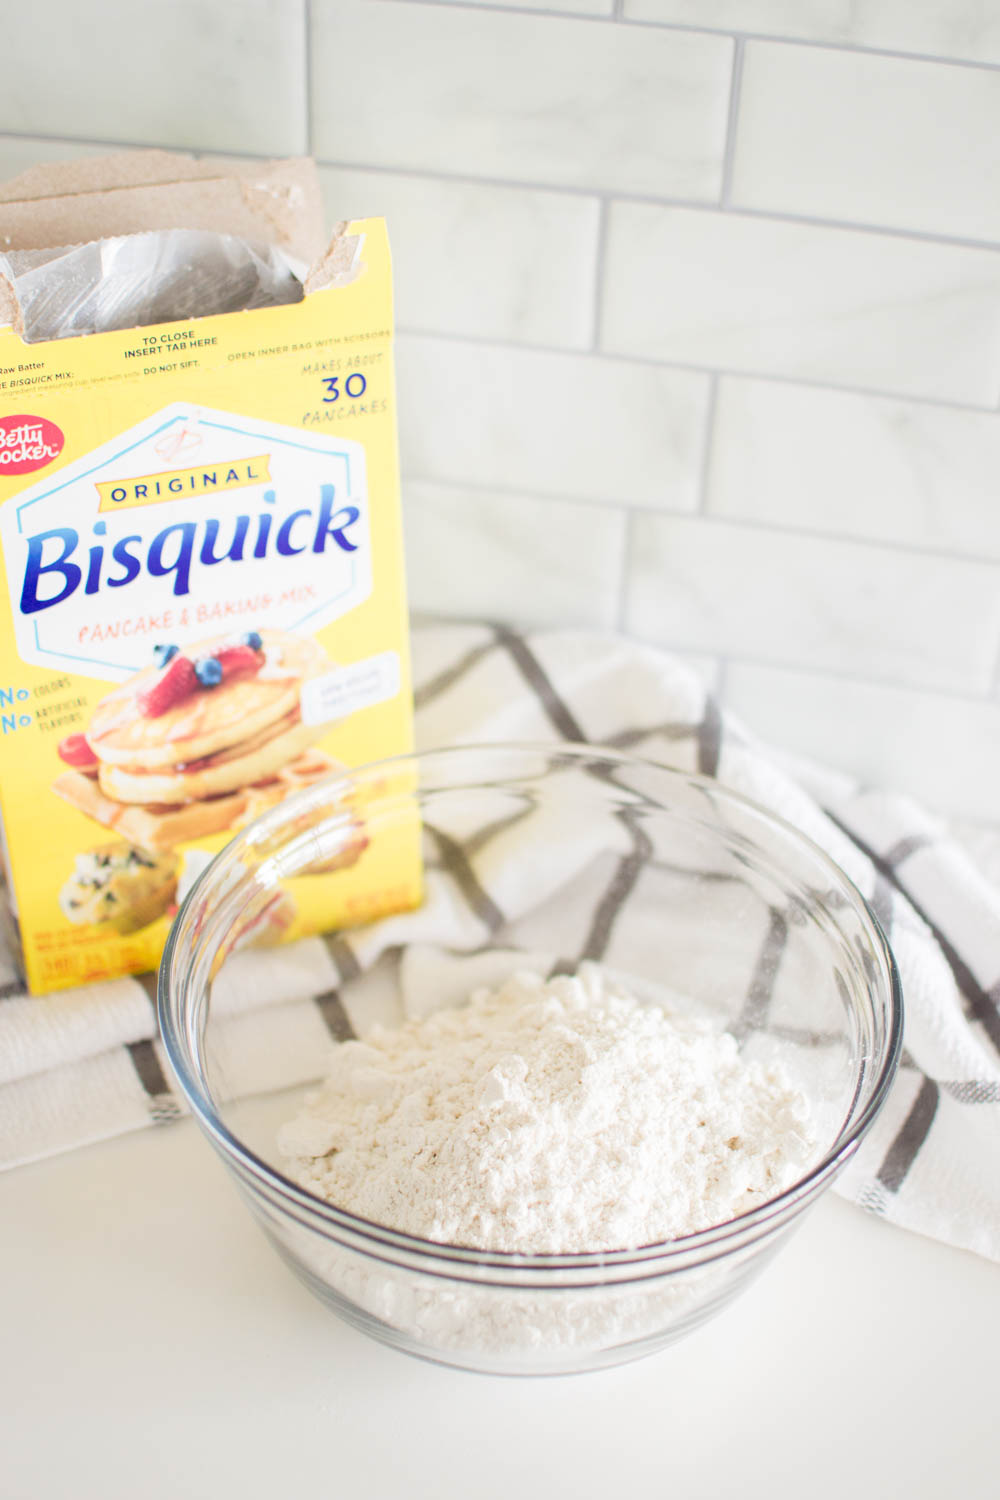 Adding Bisquick mix into a glass bowl